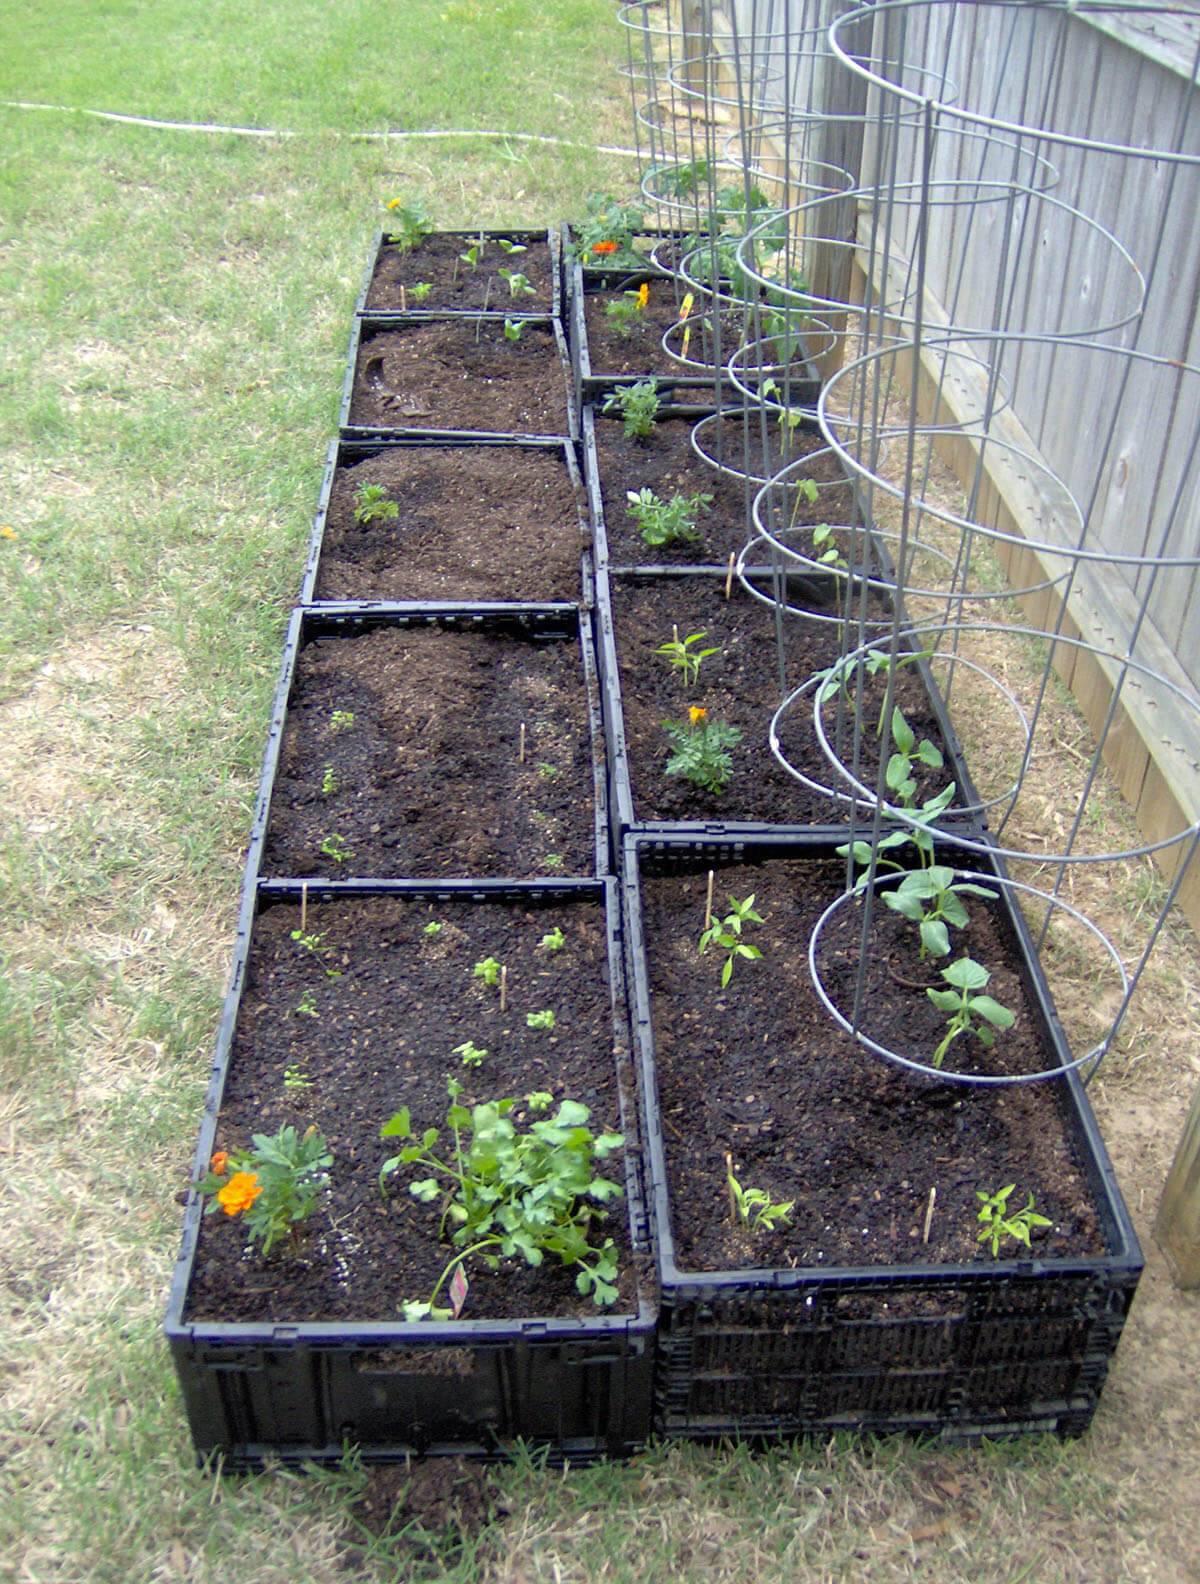 Our Square Foot Garden